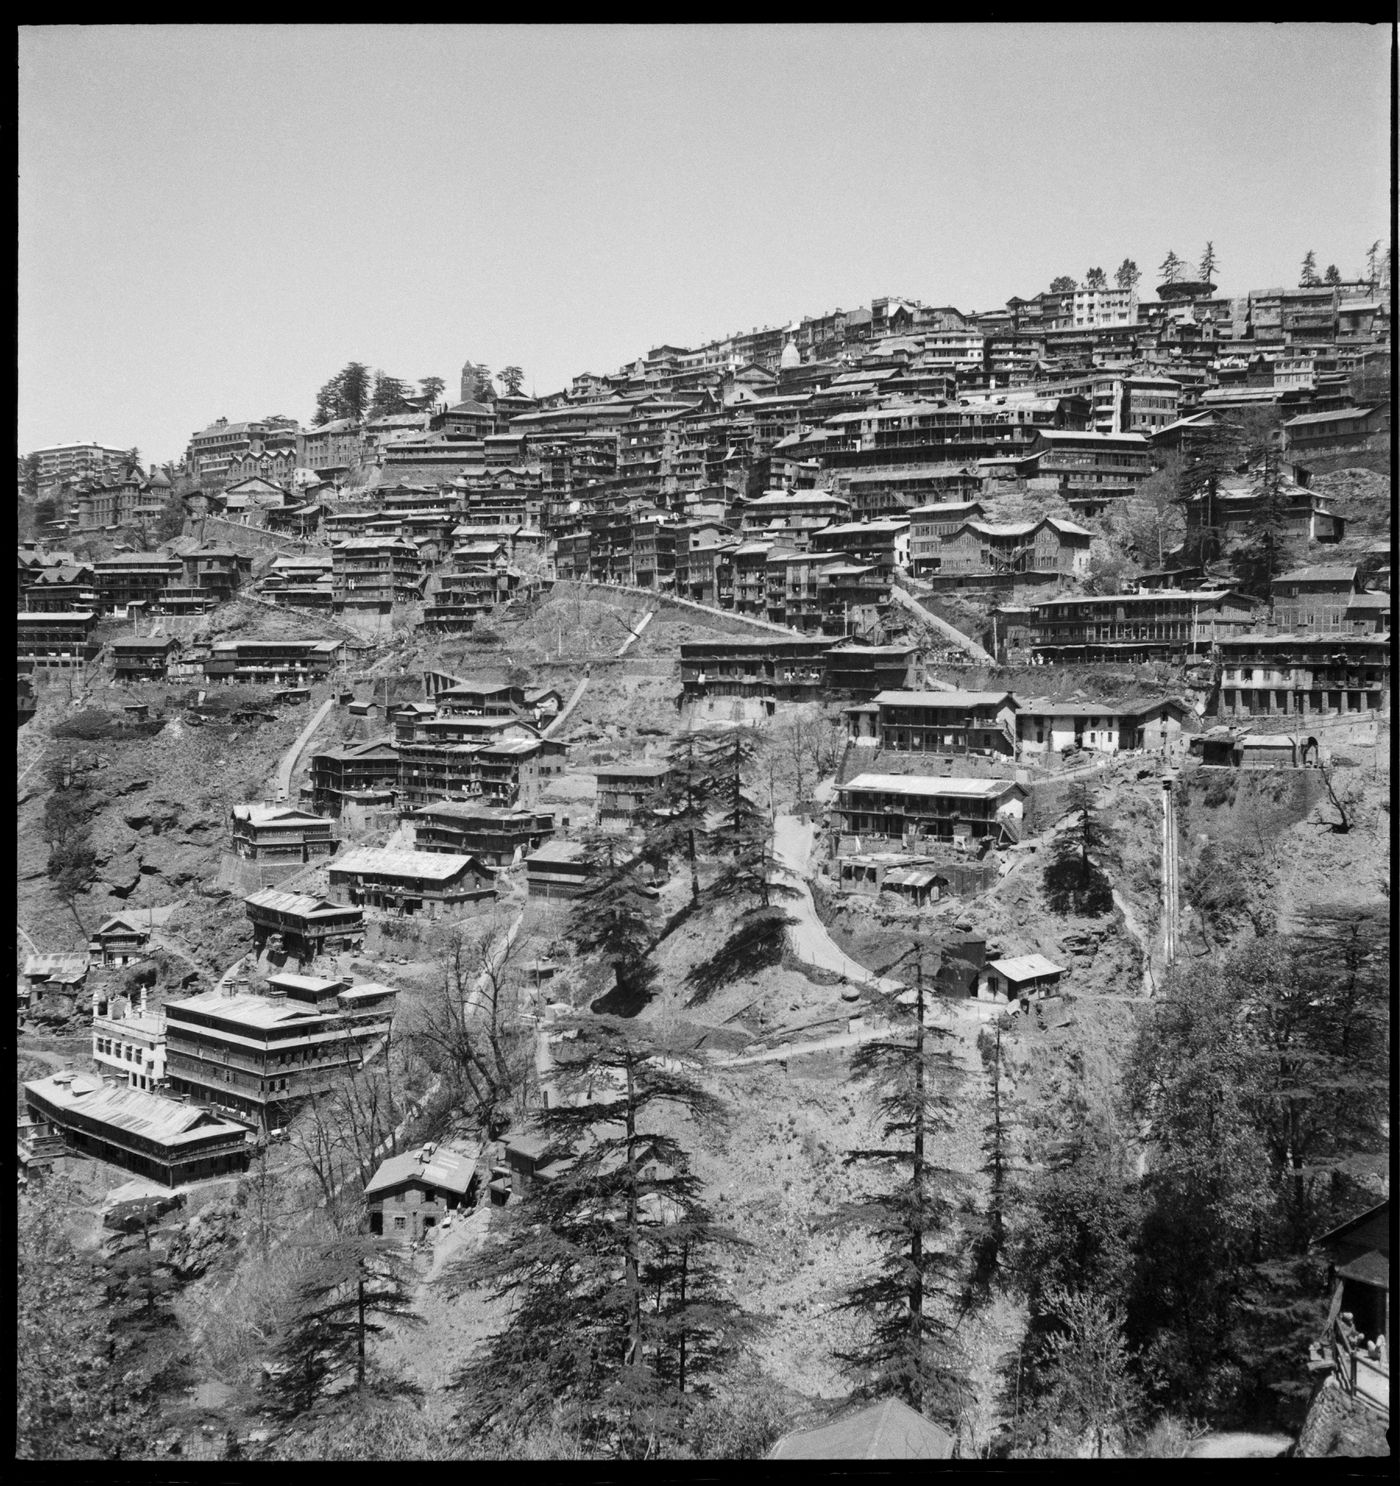 View of buildings on the mountainside, India